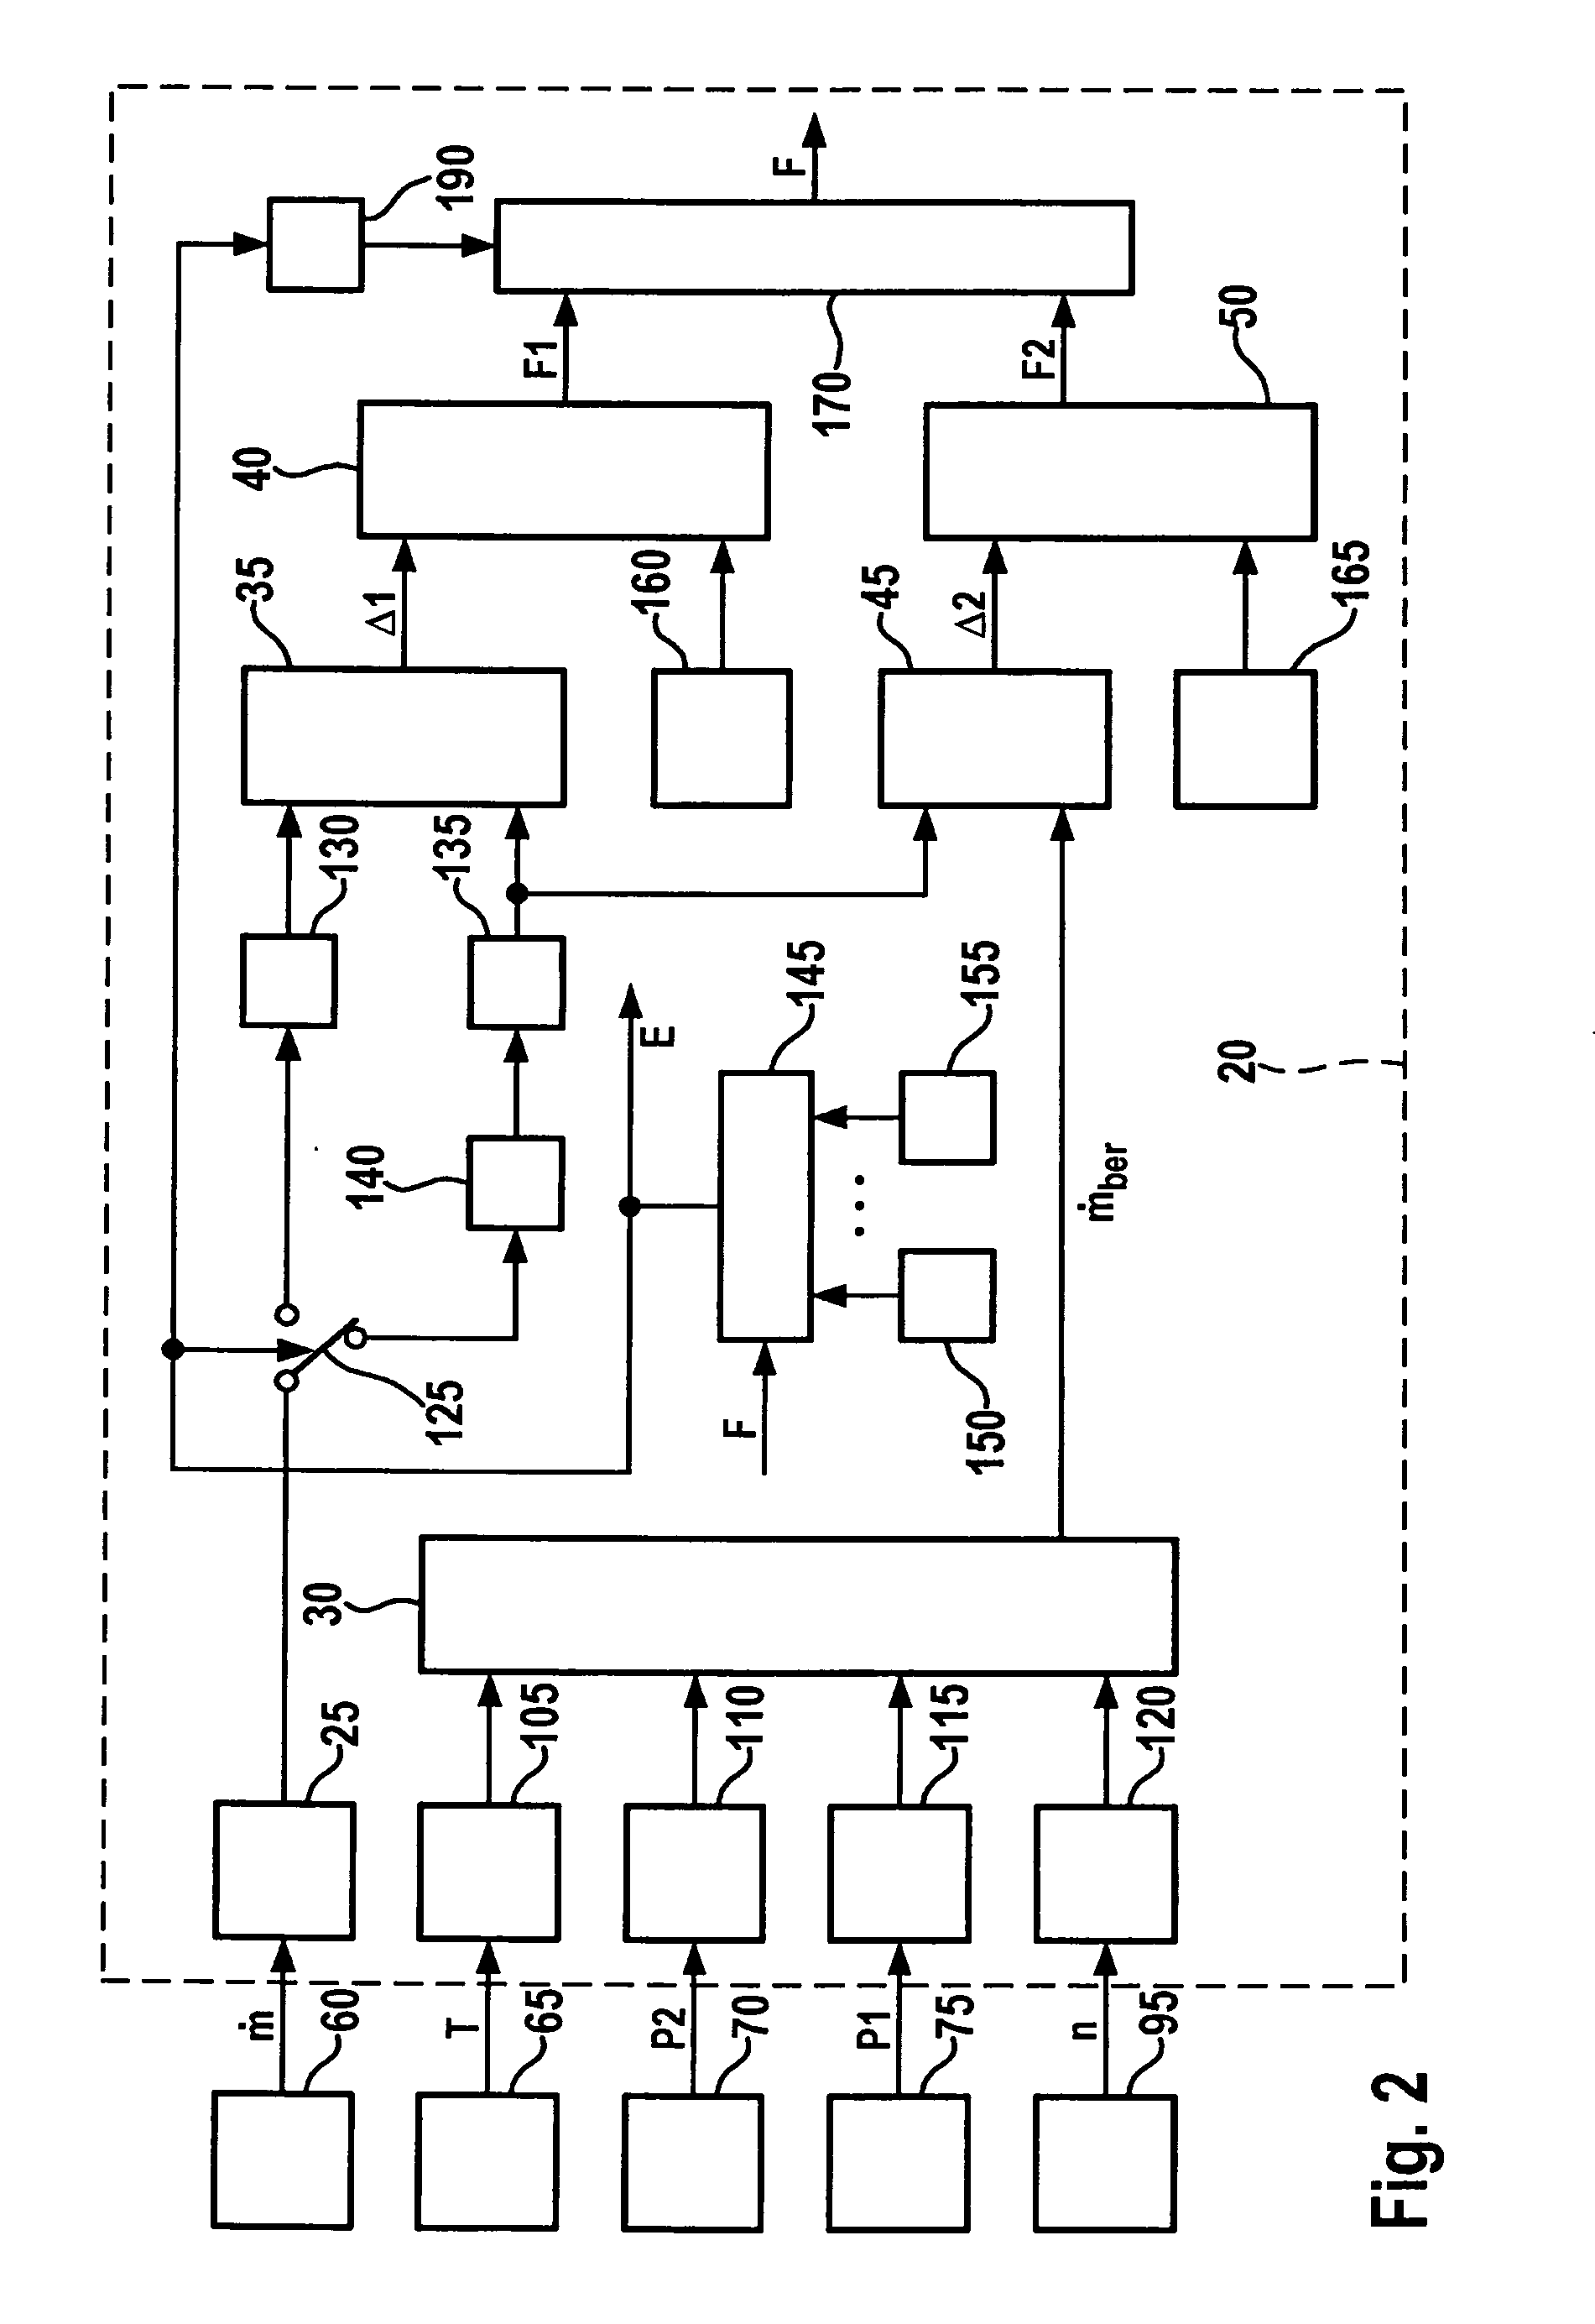 Method and device for operating an internal combustion engine having a compressor for compressing the air supplied to the internal combustion engine